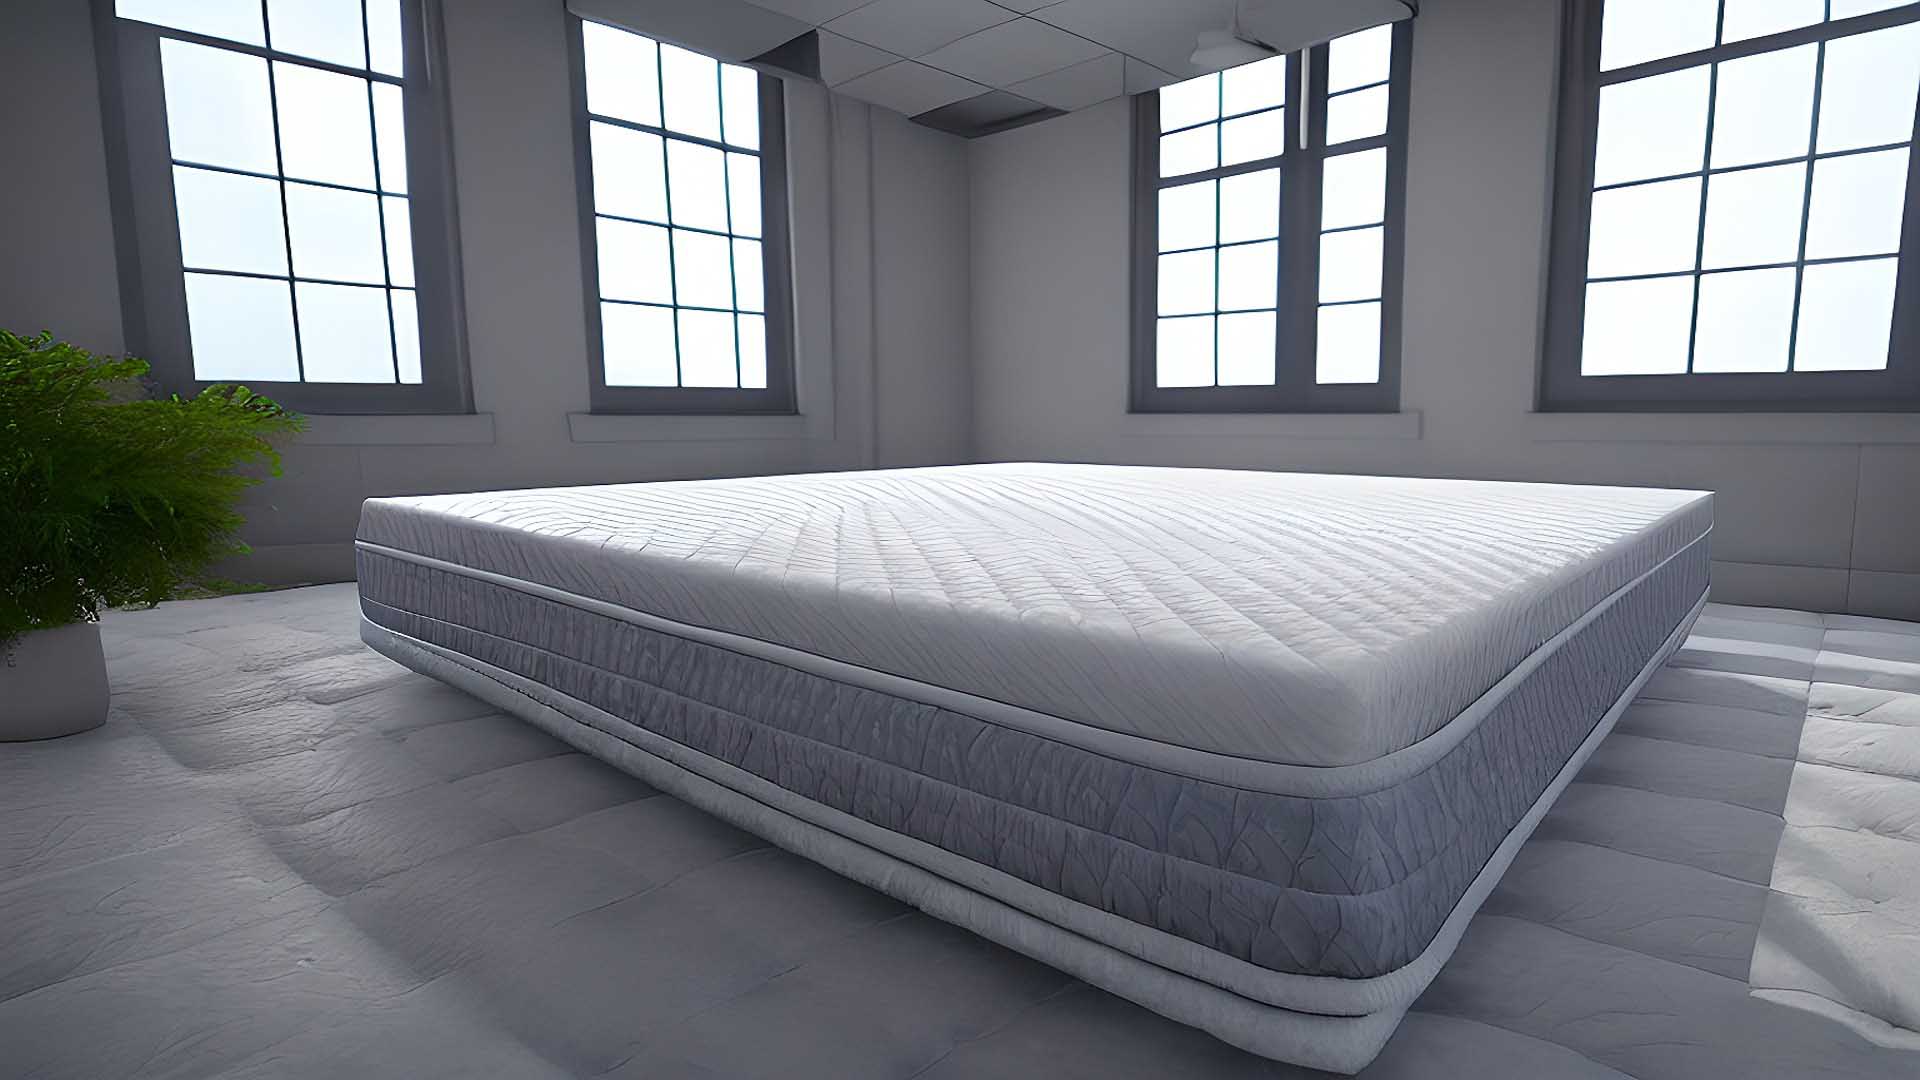 Affordable Mattress in Sod, WV